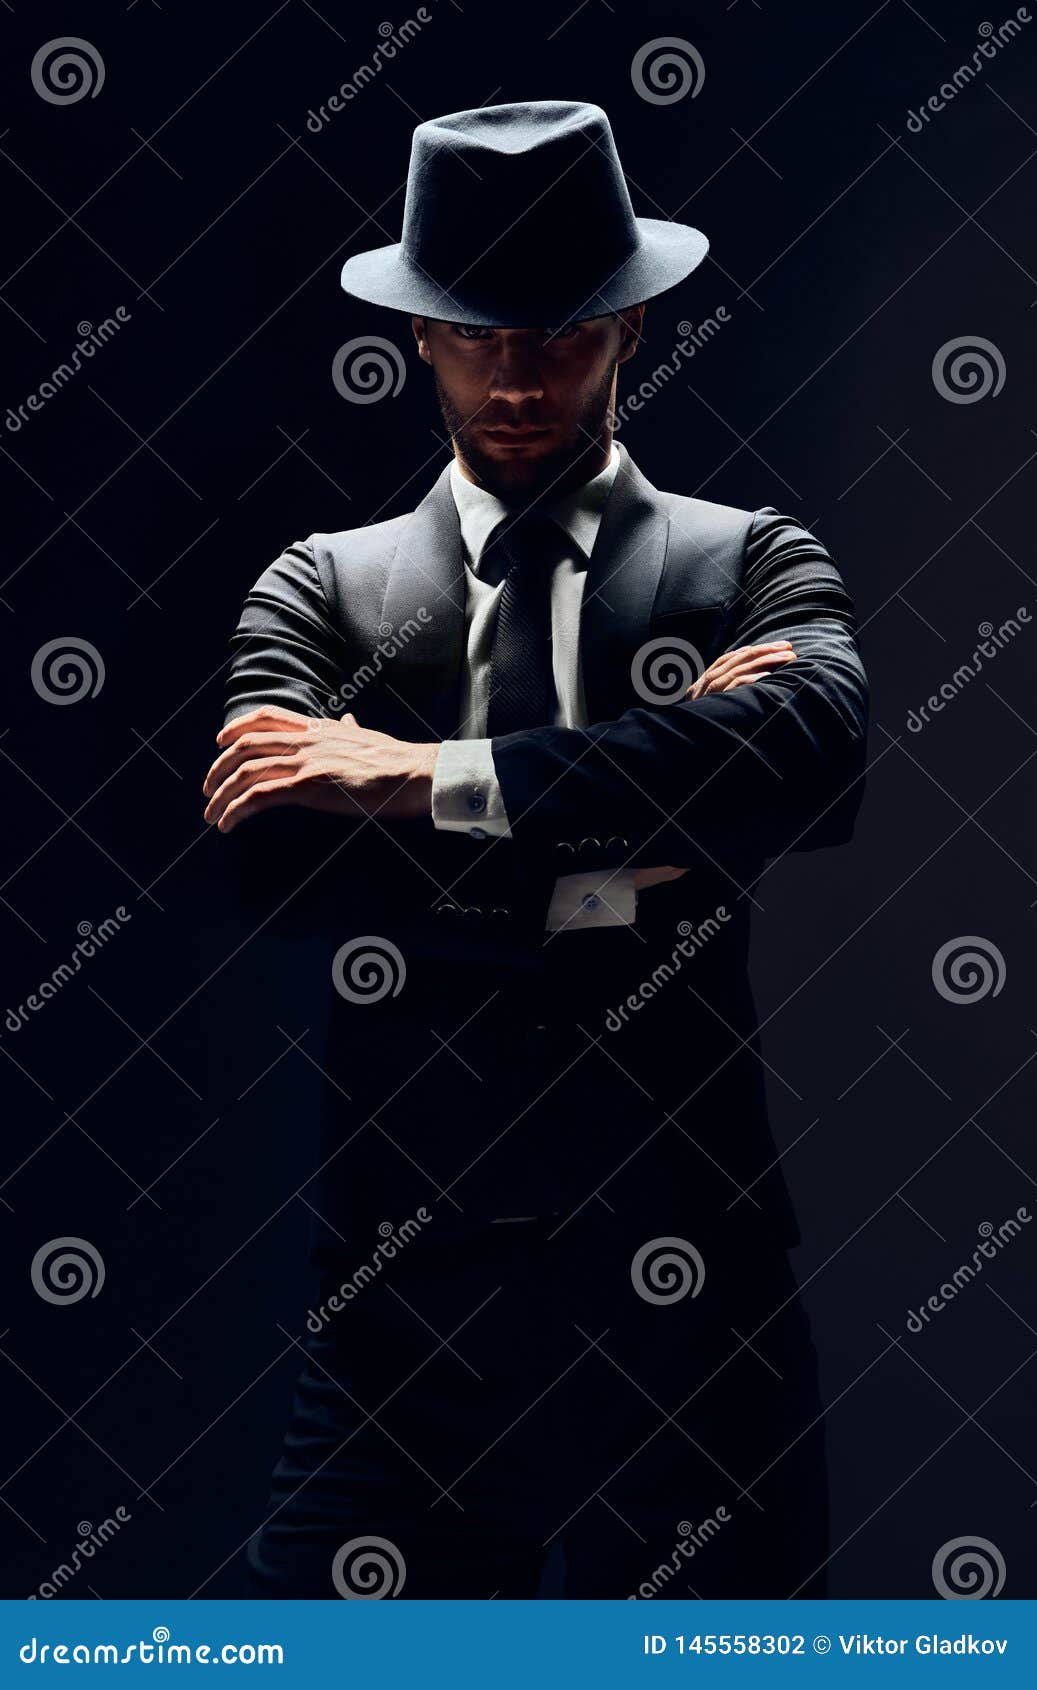 Handsome Confident Man In Black Suit And Hat With Arms Crossed On Dark ...